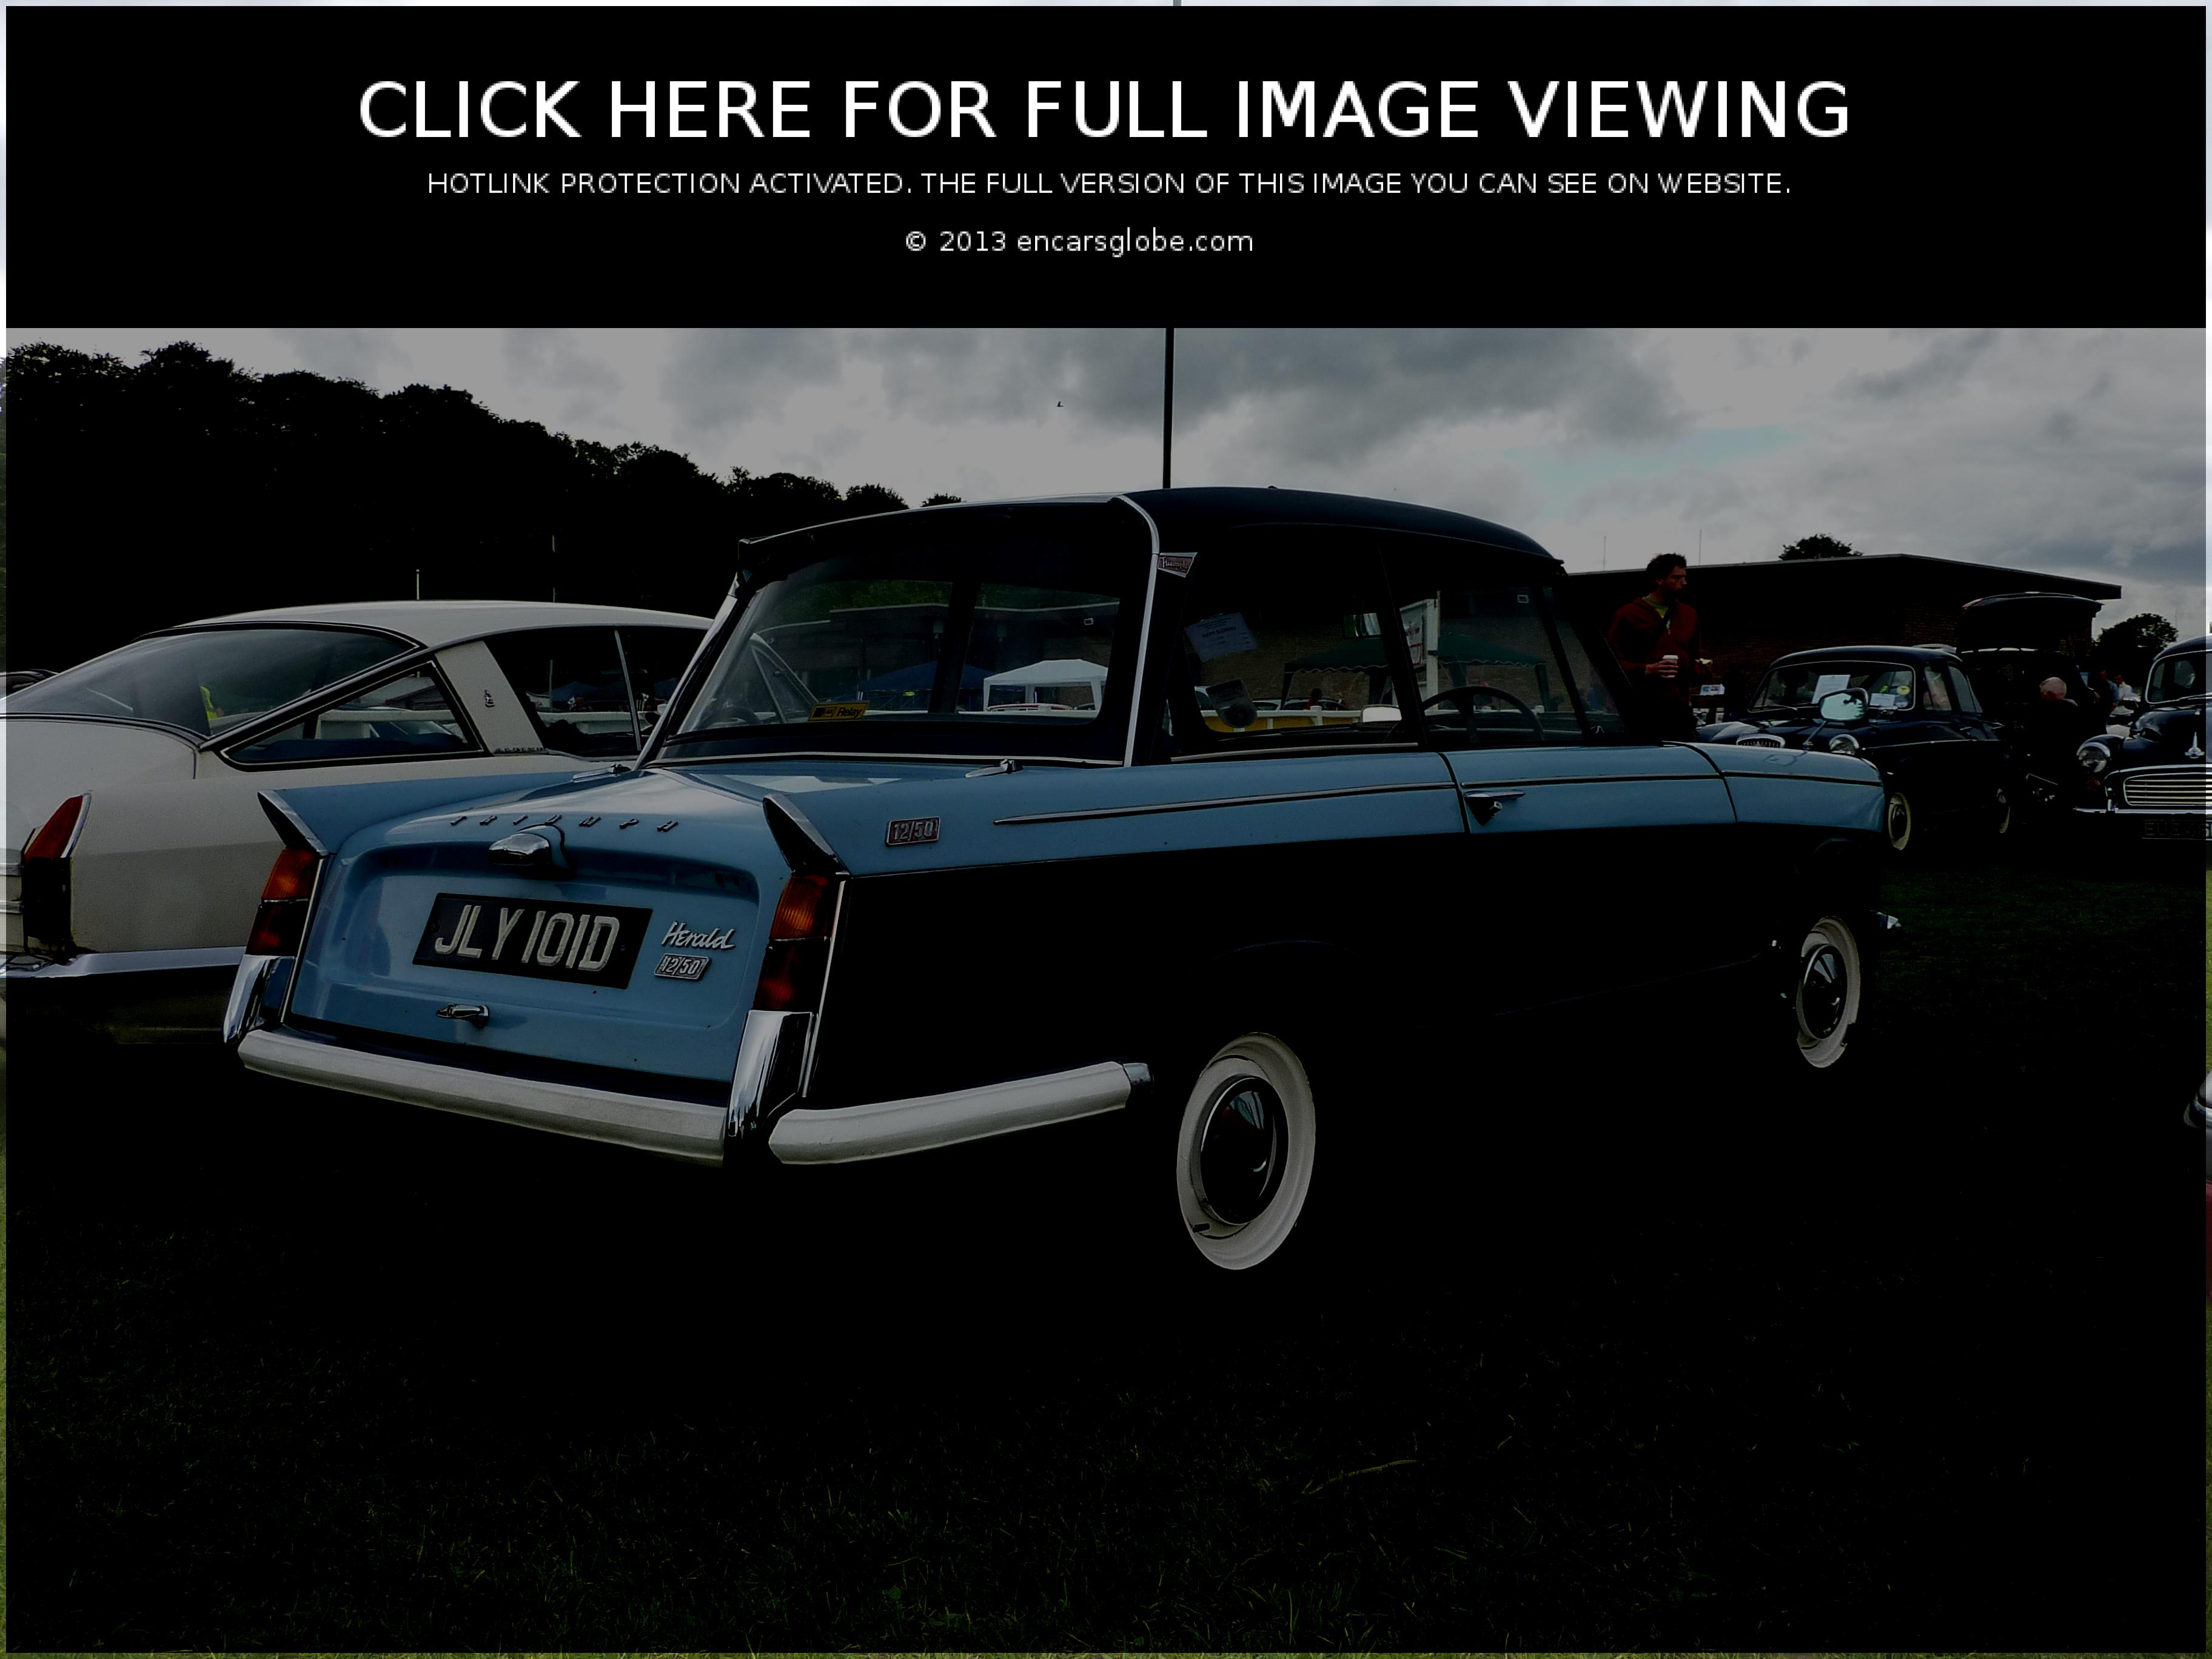 Triumph Herald 1250 Photo Gallery: Photo #09 out of 7, Image Size ...